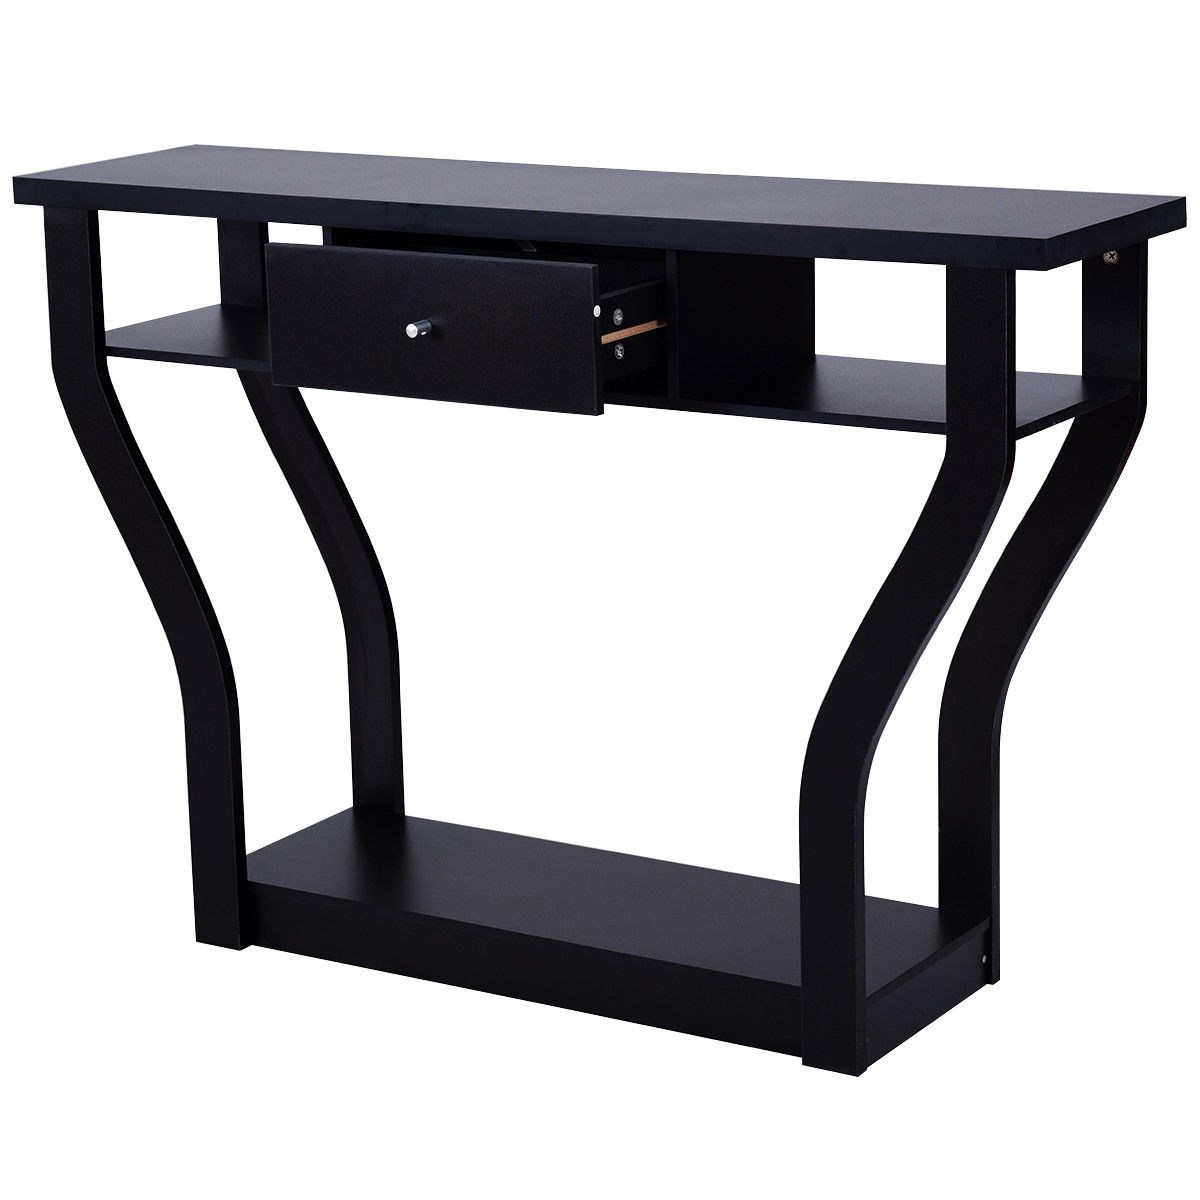 way black accent console table modern sofa entryway hallway hall furniture drawer with drawers free shipping today metal nic tables round marble top coffee carpet transition strip